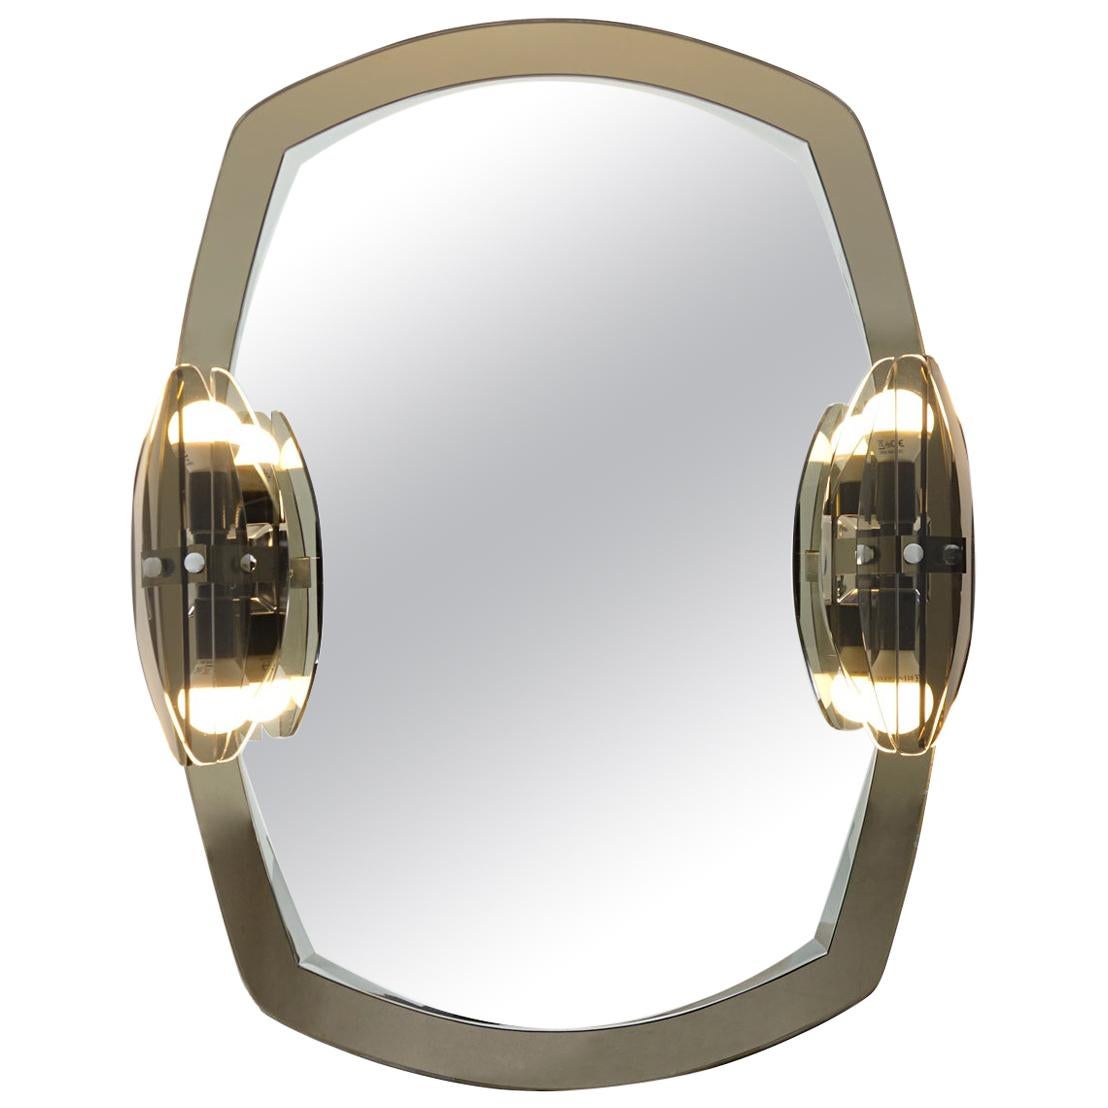 Hollywood Regency Two-Toned Mirror with Lights made by Veca